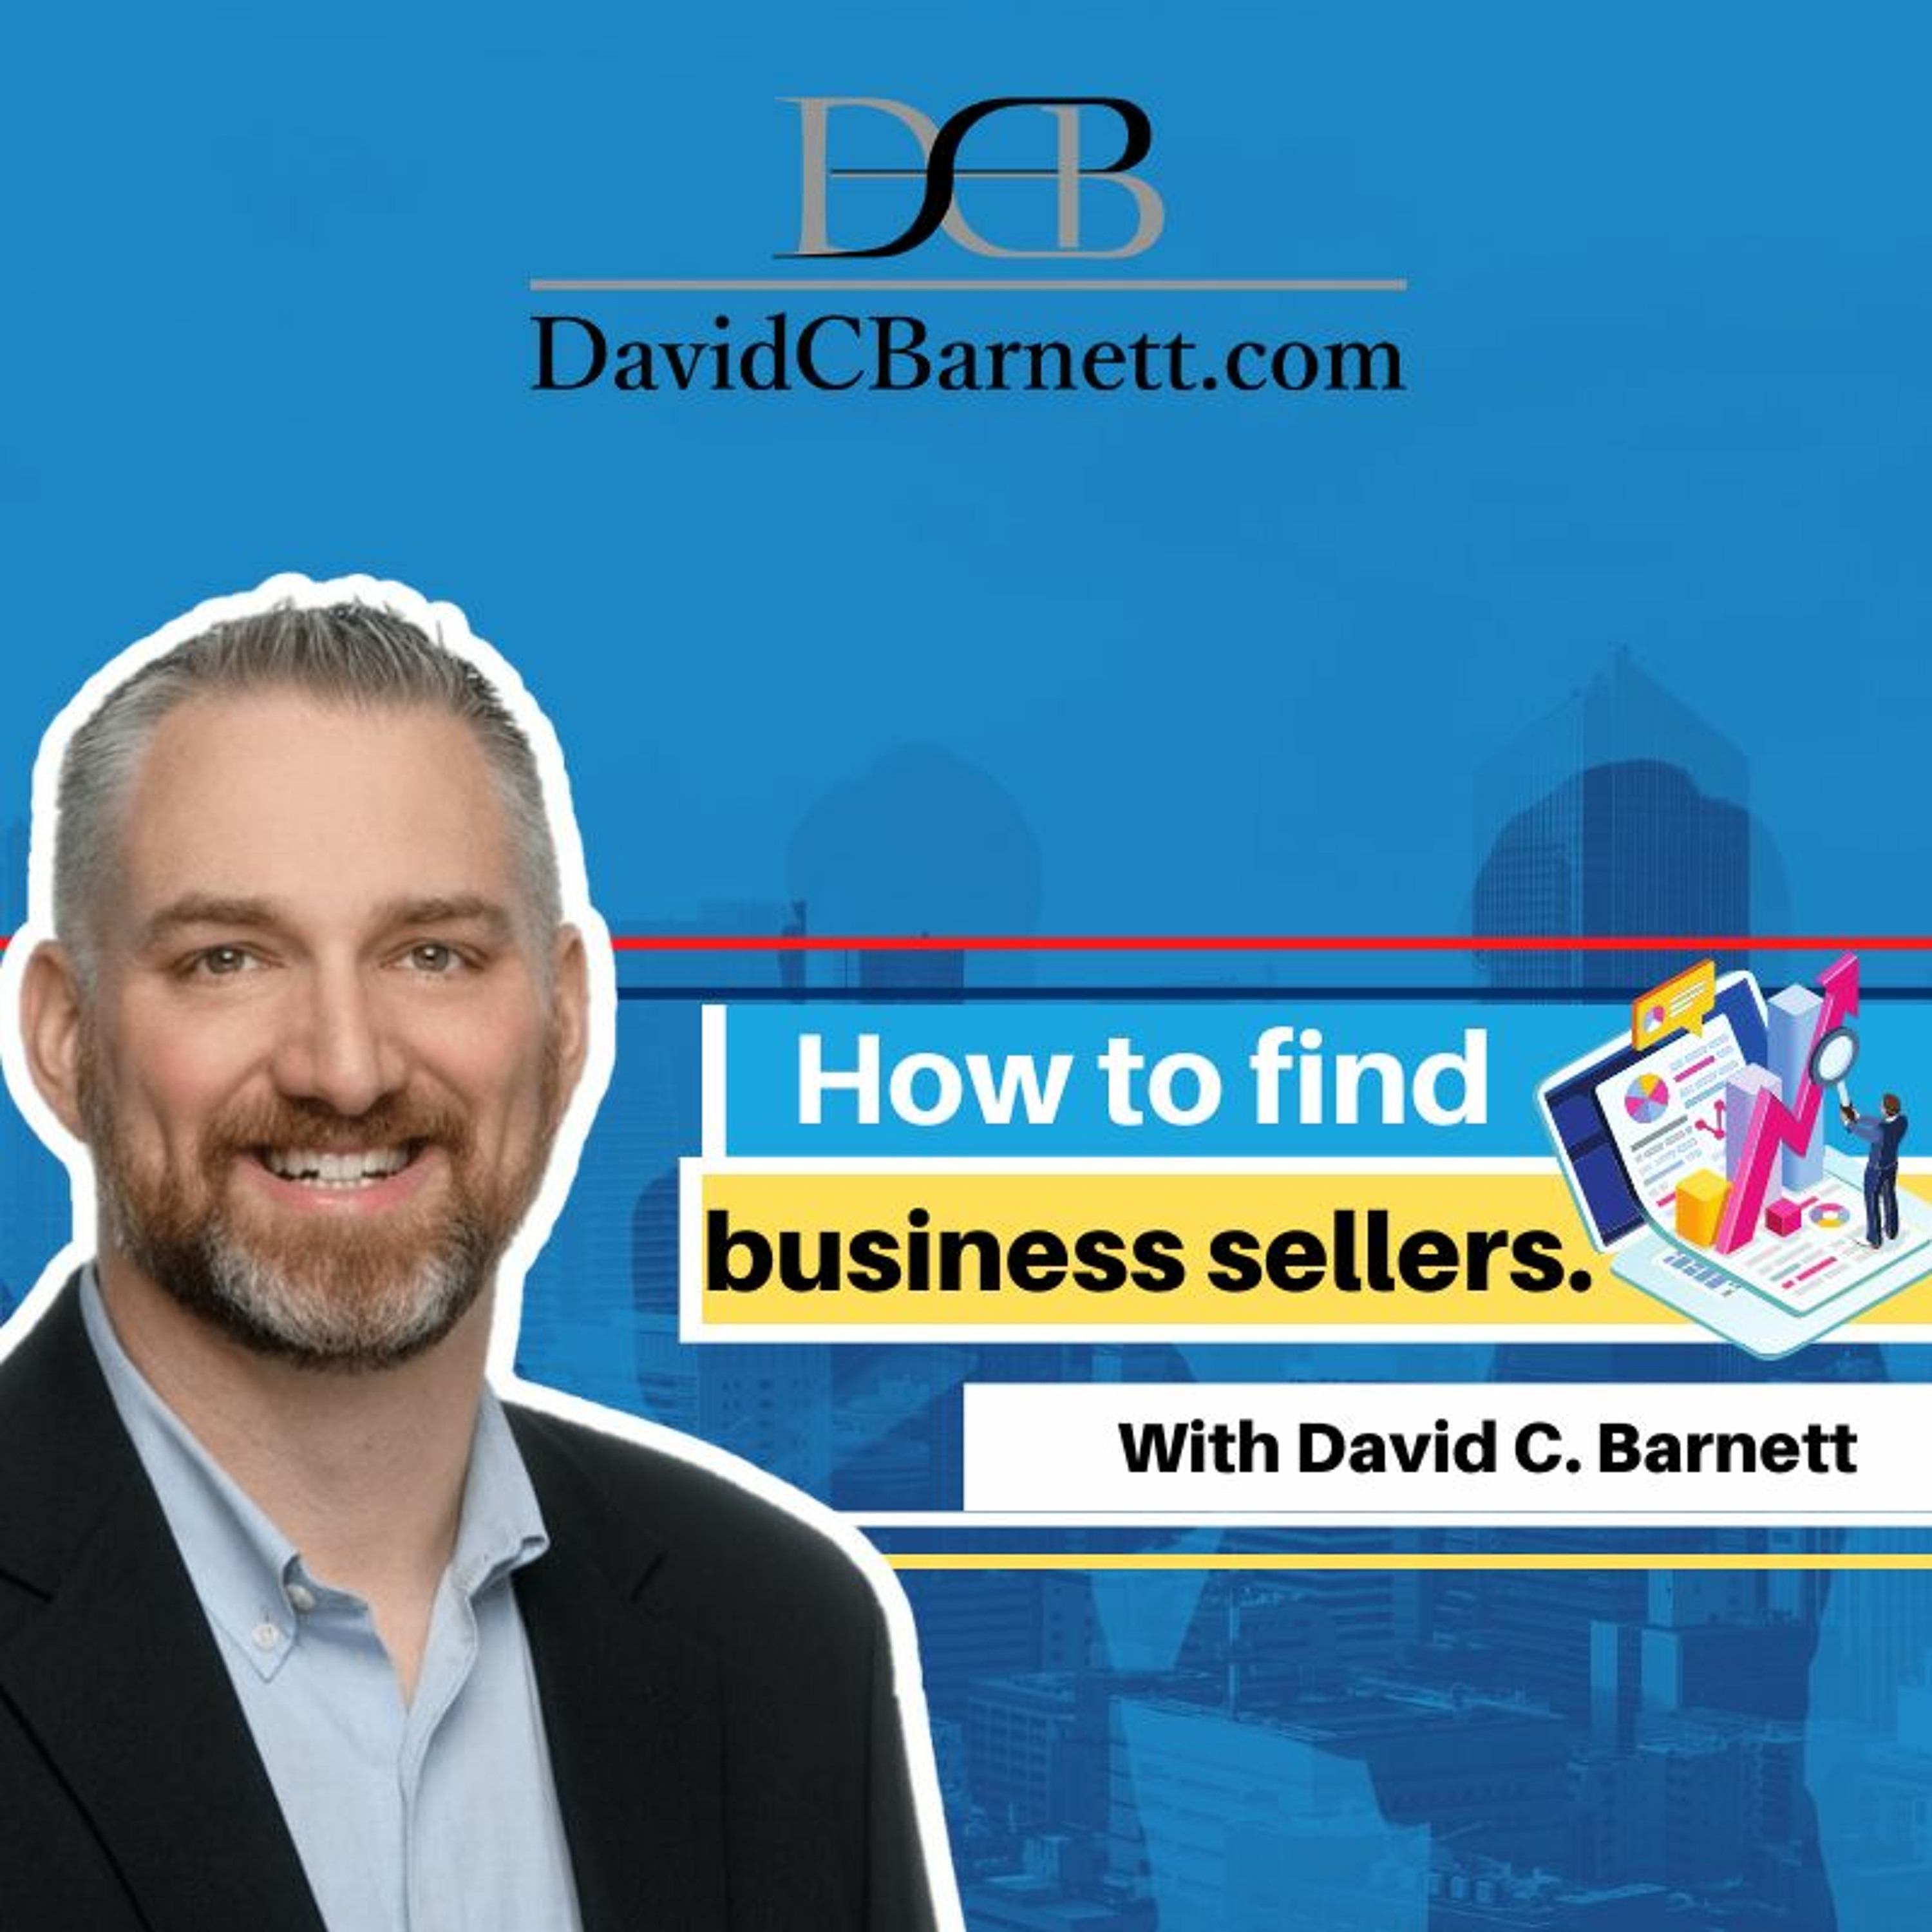 How Do You Find Business Sellers